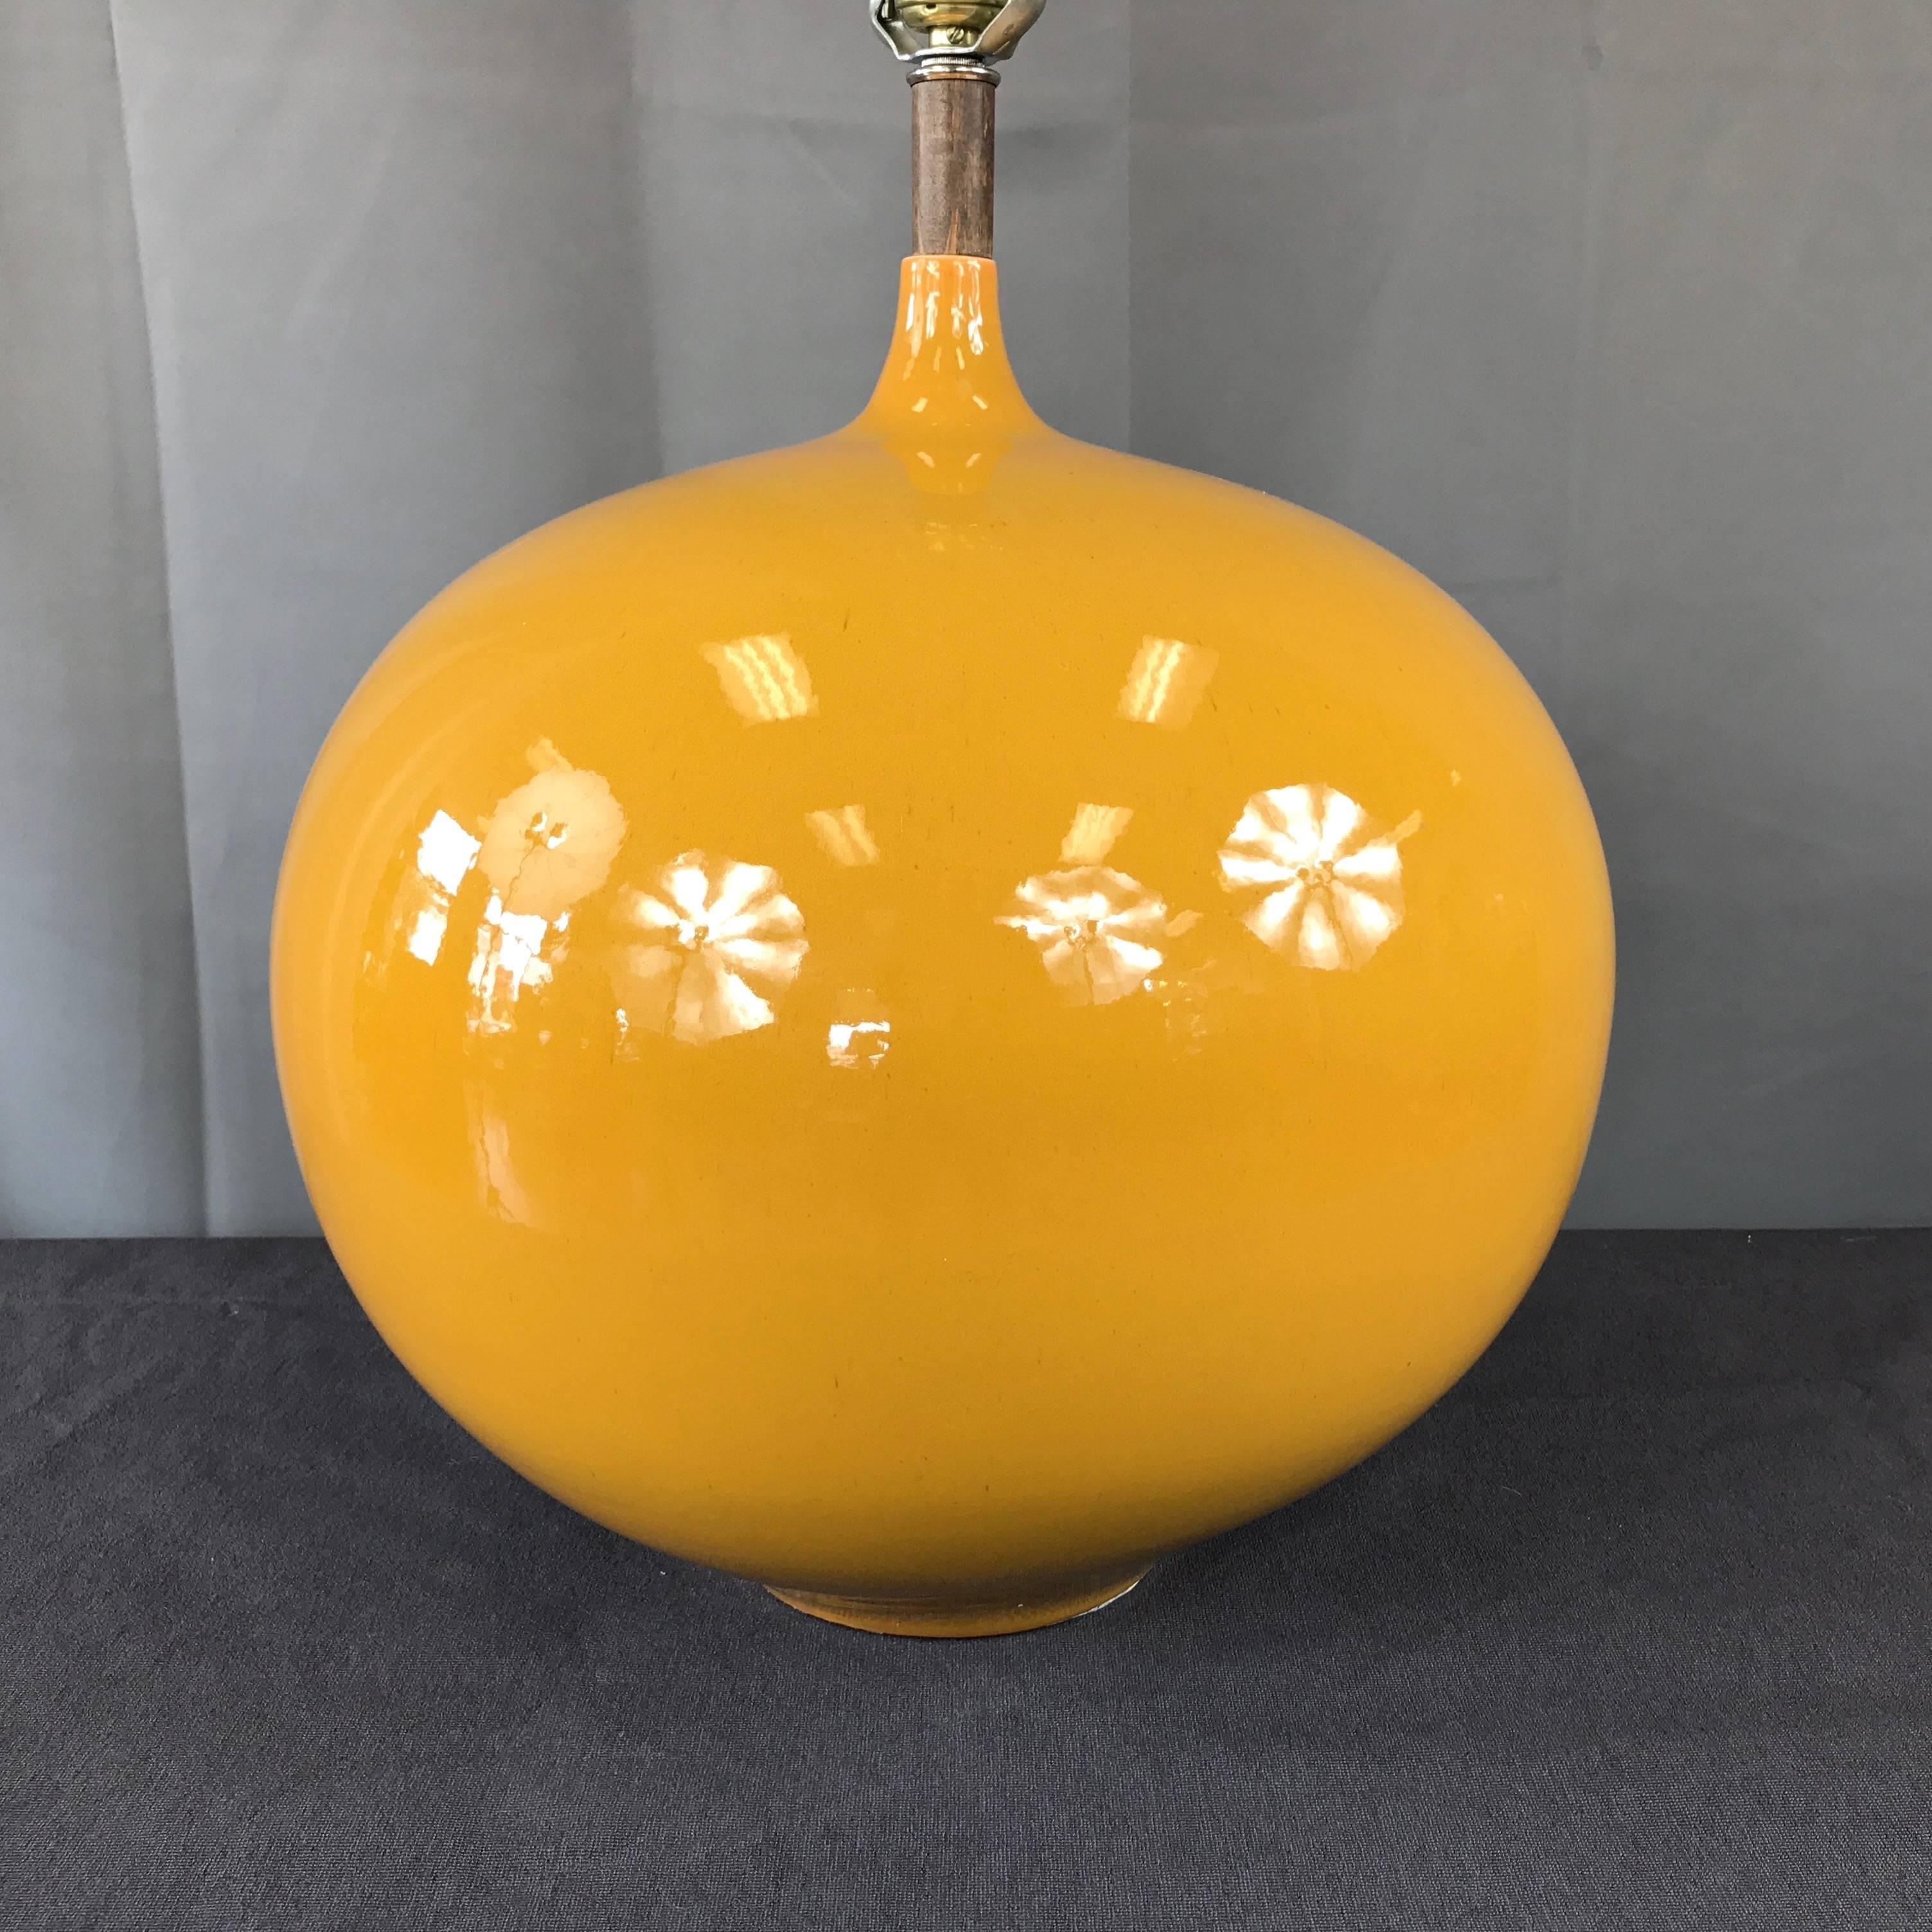 An impressively sized 1970s ceramic table lamp with orangish-yellow glaze and original shade.

Scale and color make it the sunny side up centerpiece of any room. Body shape is a classic combination of globe and onion, giving it a versatile